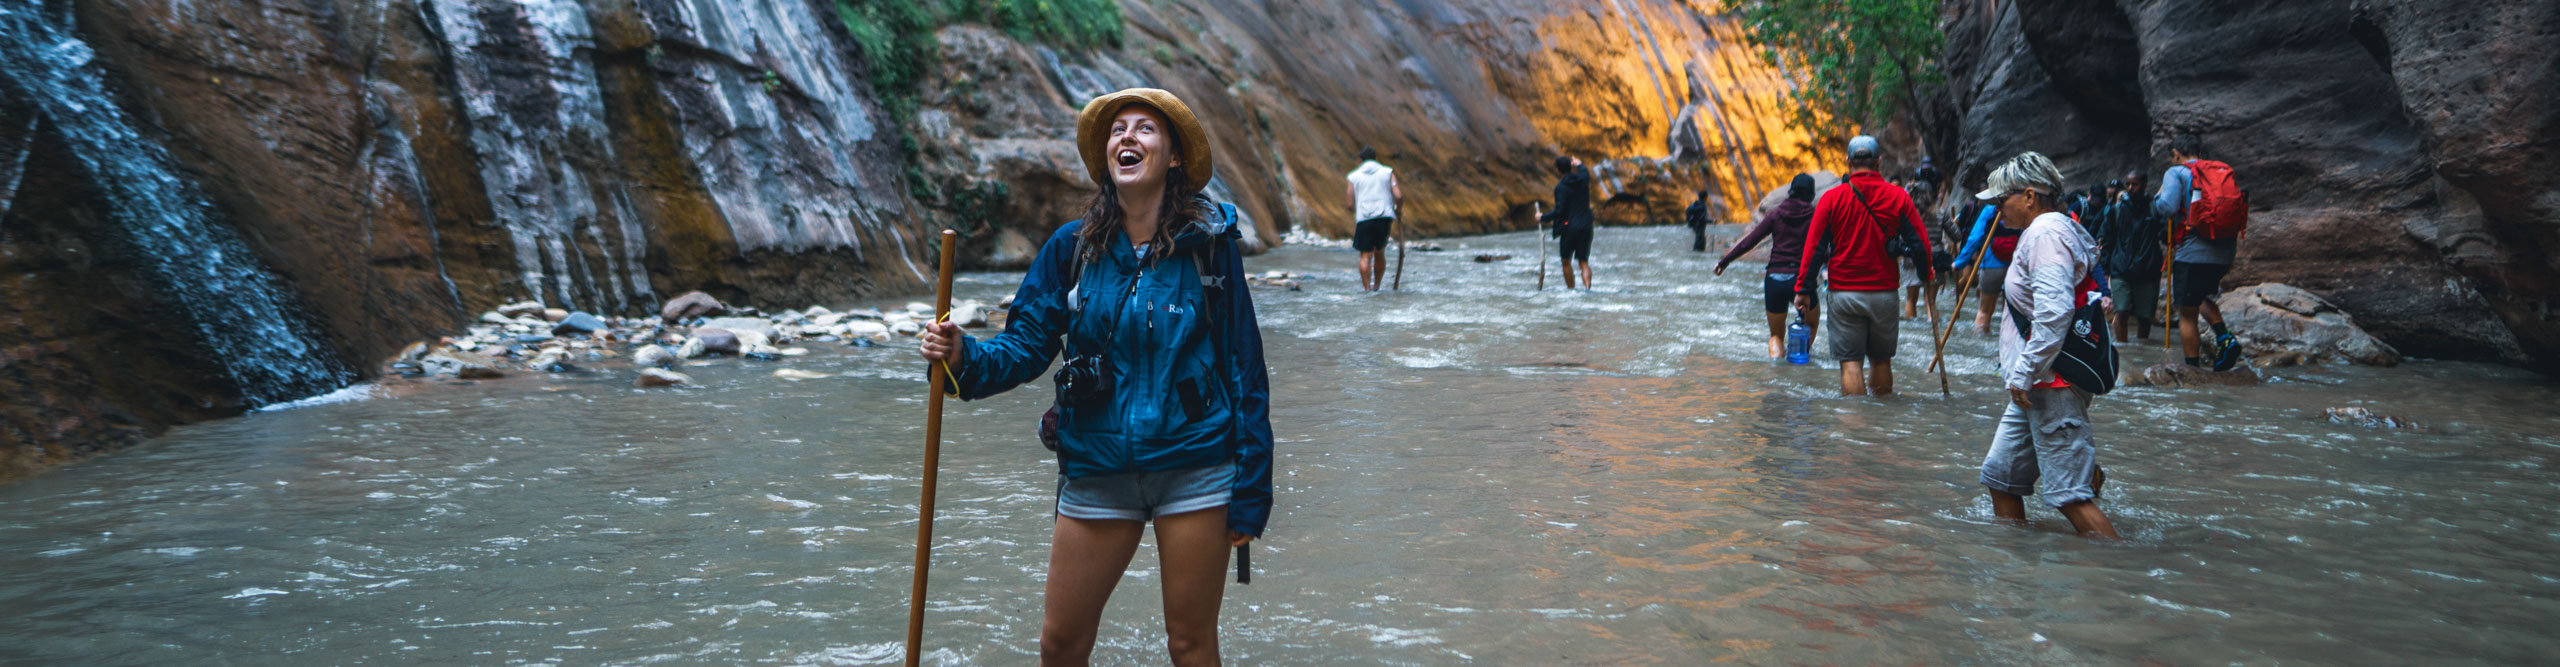 Woman smiling while hiking through the river in the canyon in Zion National Park, Utah, USA